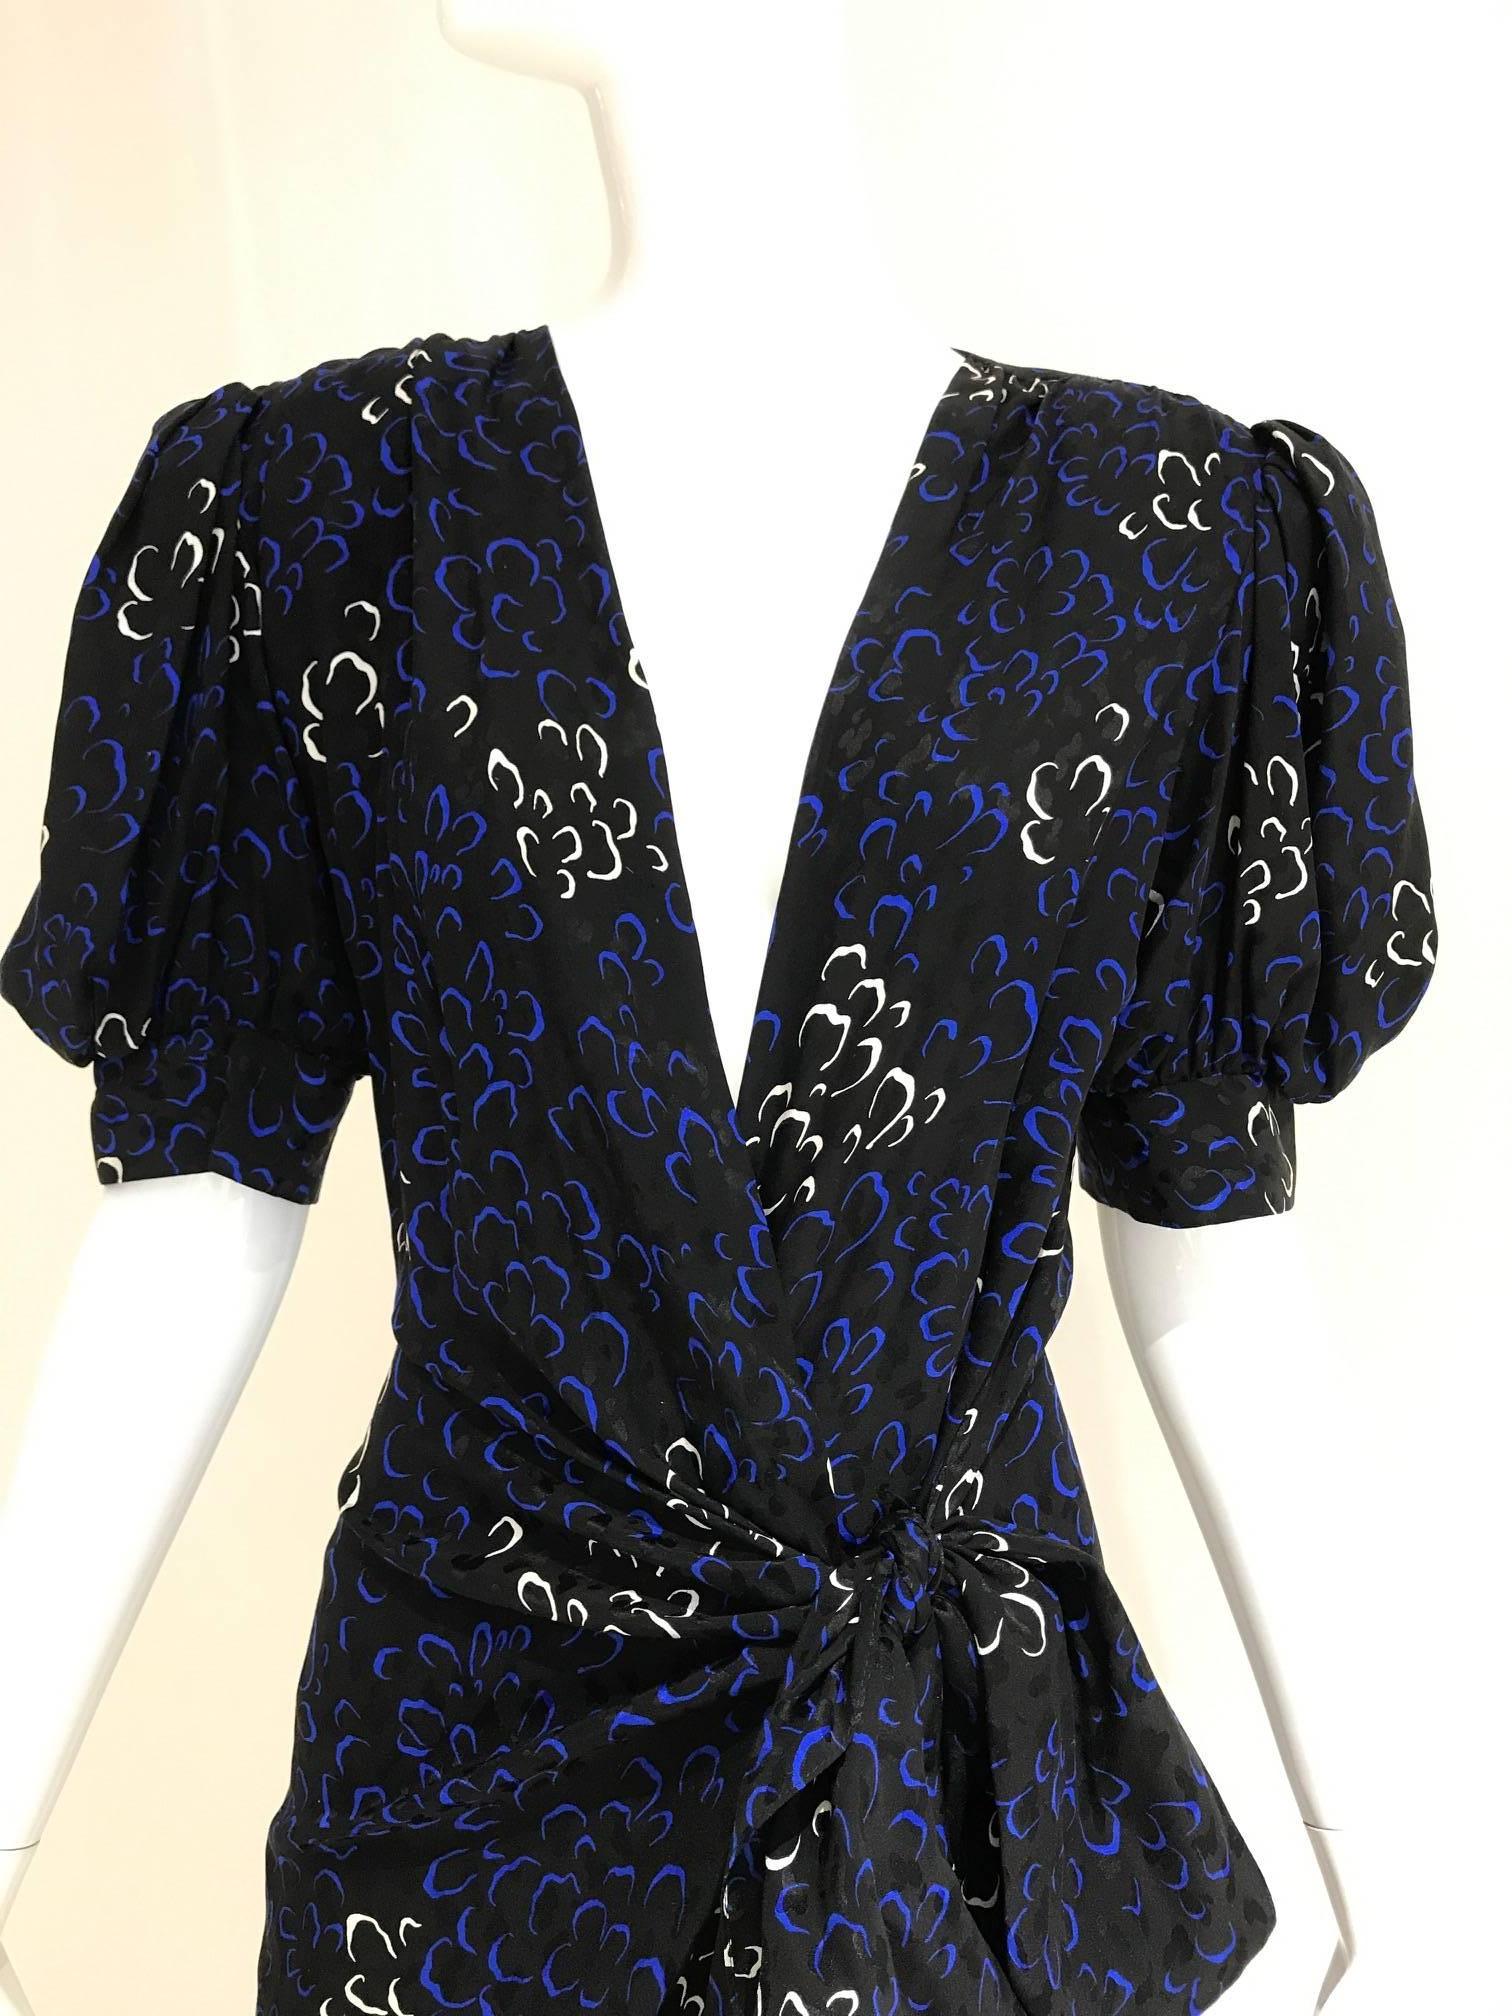 Chic Vintage Yves saint laurent silk wrap dress in navy, black and white print wrap dress. Dress marked size 44. Fit to US modern 8. 